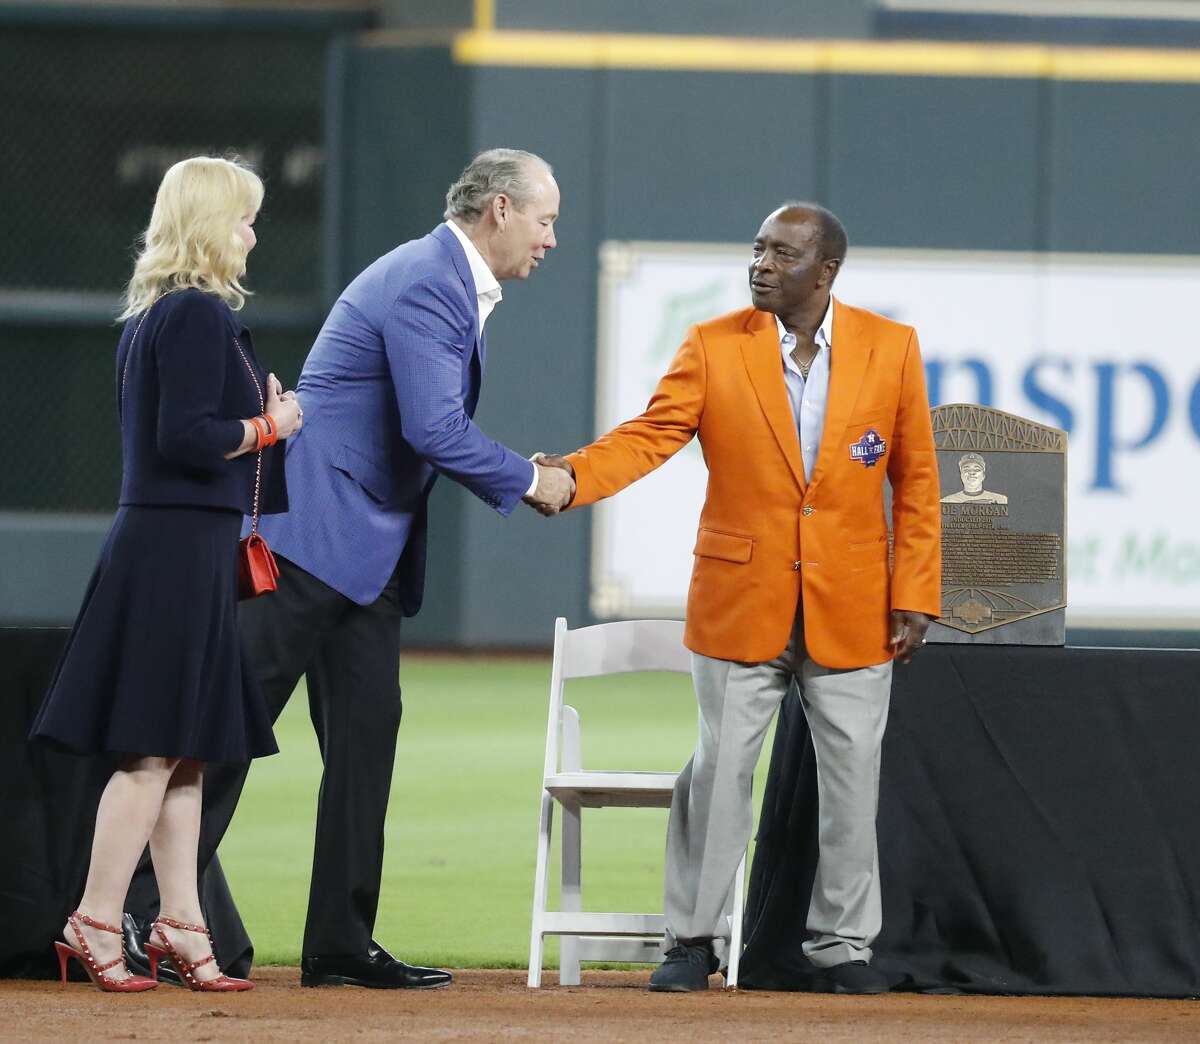 Joe Morgan during the Houston Astros inagural Hall of Fame induction ceremony before the start of an MLB game at Minute Maid Park, Sunday, August 3, 2019.